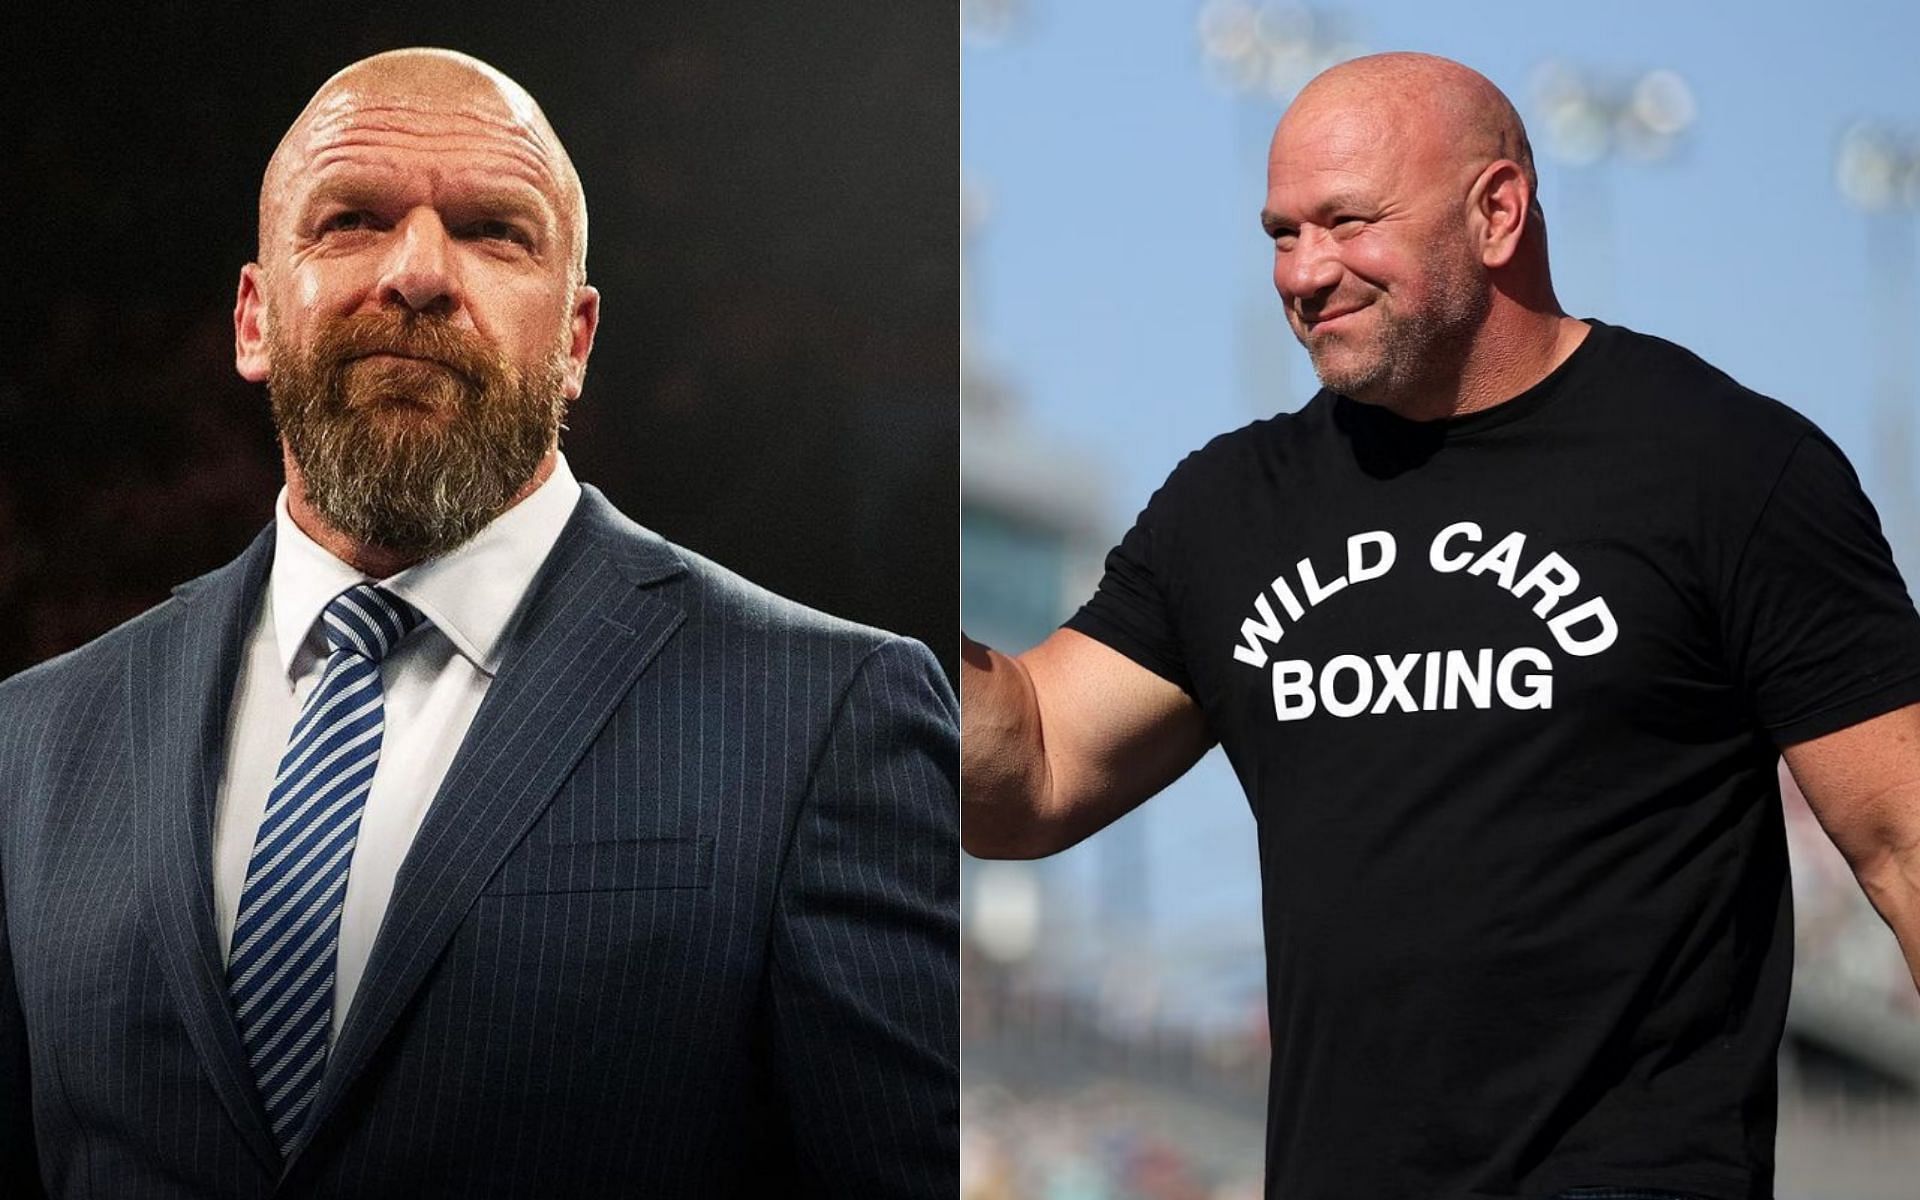 Triple H aka Paul Levesque (left) and Dana White (right) [Image credits: @tripleh on Instagram]